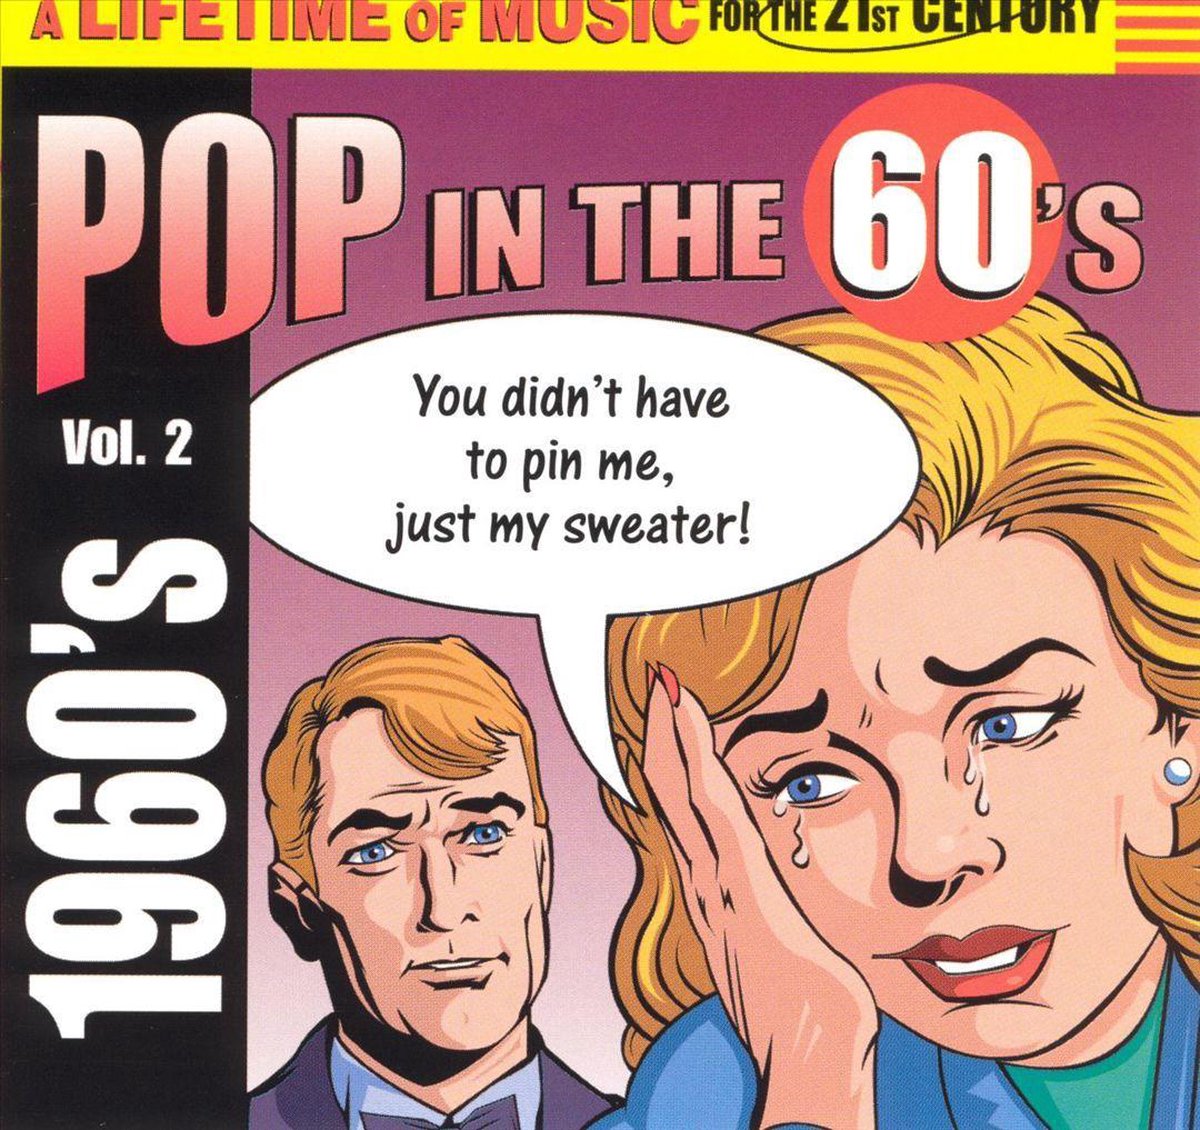 Pop in the 60's, Vol. 2 - various artists